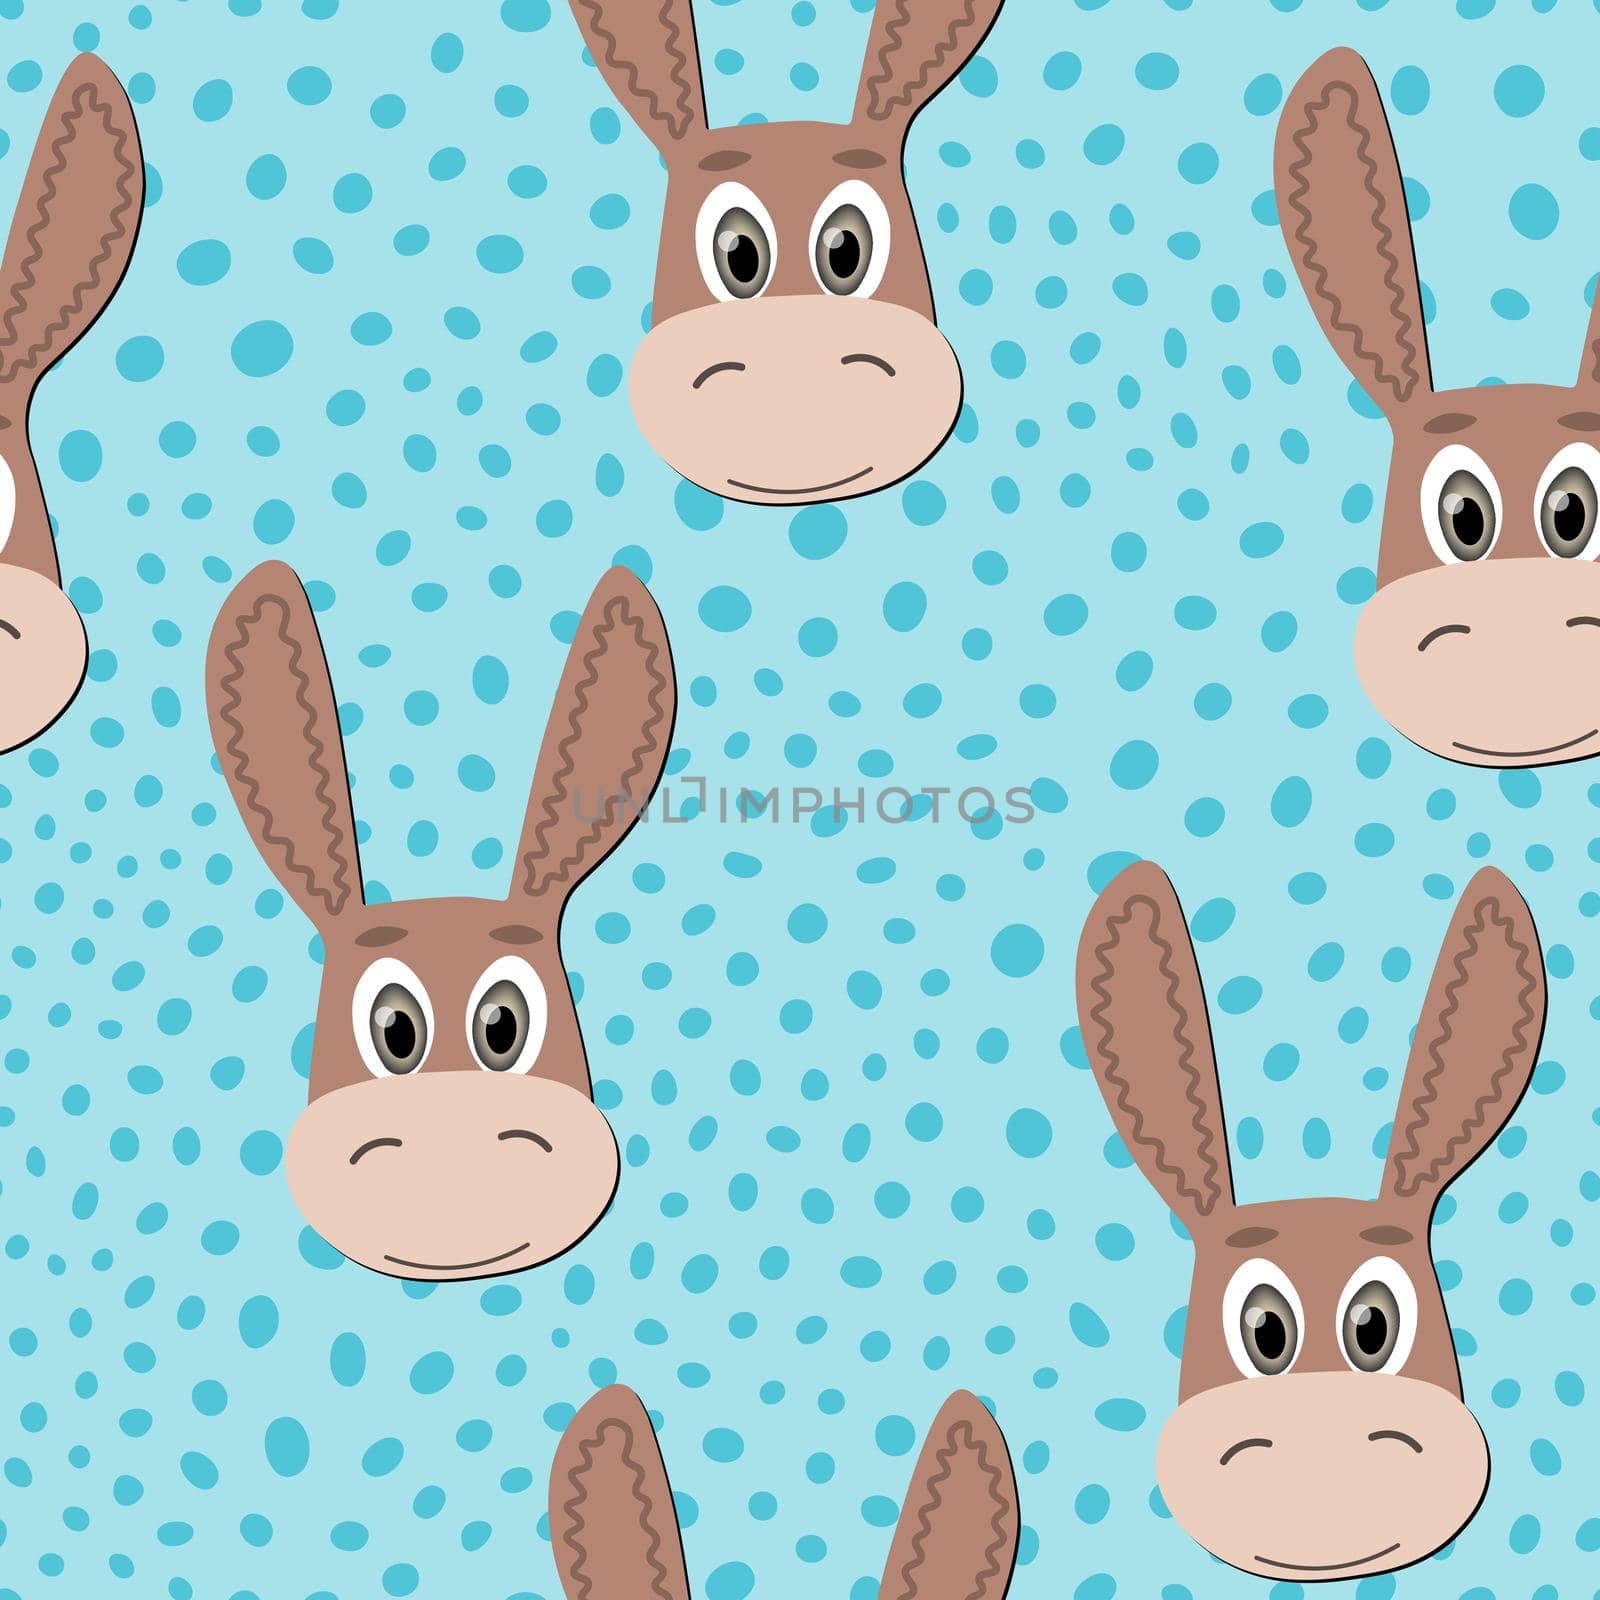 Vector flat animals colorful illustration for kids. Seamless pattern with cute donkey face on blue polka dots ackground. Cartoon adorable character. Design for textures, card, poster, fabric,textile